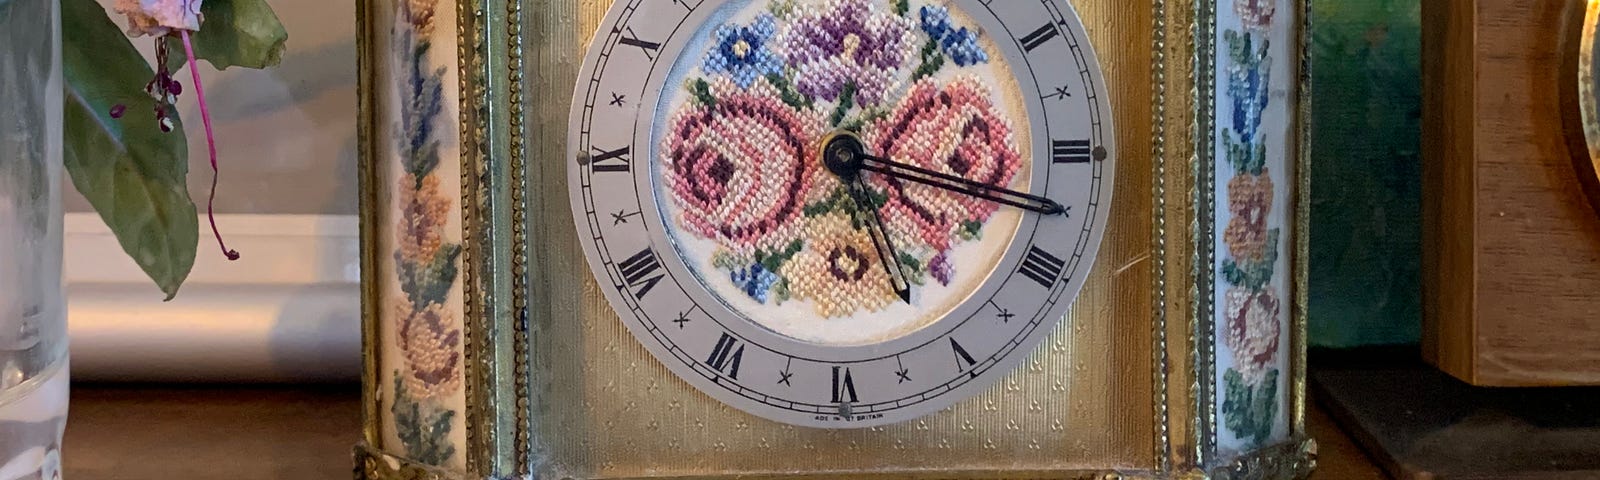 an old gilt clock, with a silk face embroidered with flowers, sat on a bookshelf.